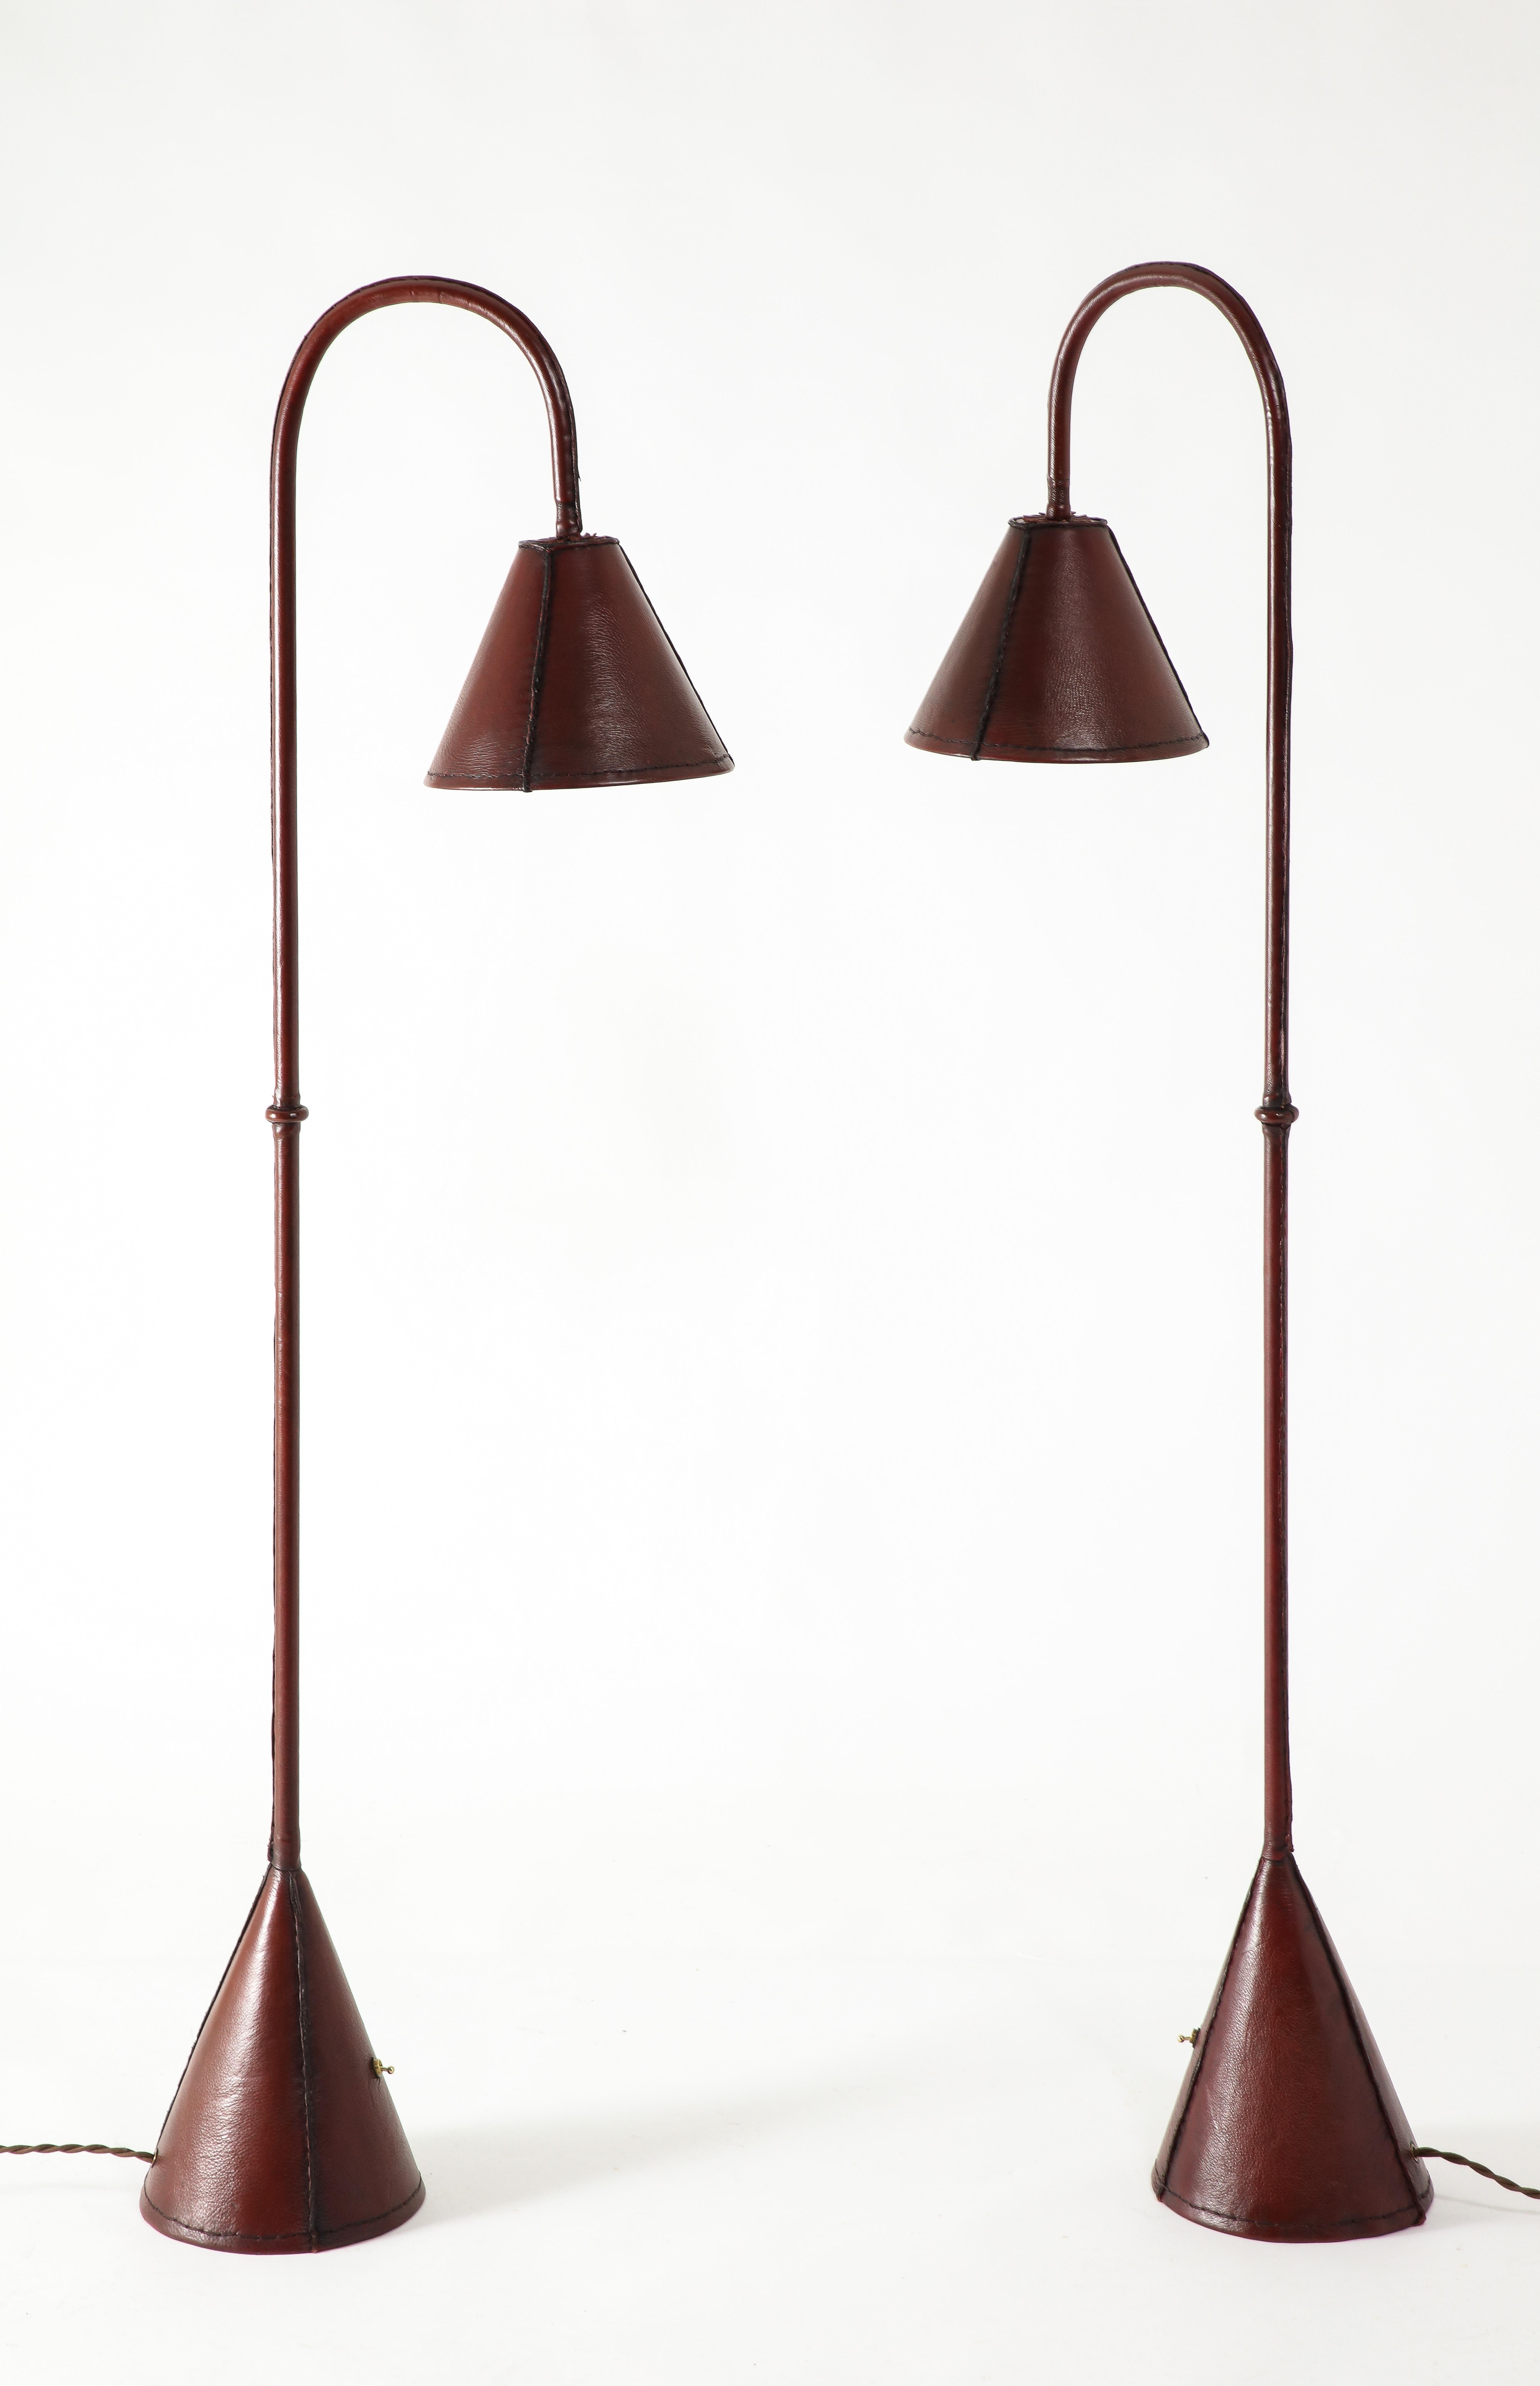 Valenti / Adnet Reading Floor Lamps, France 1950's For Sale 1